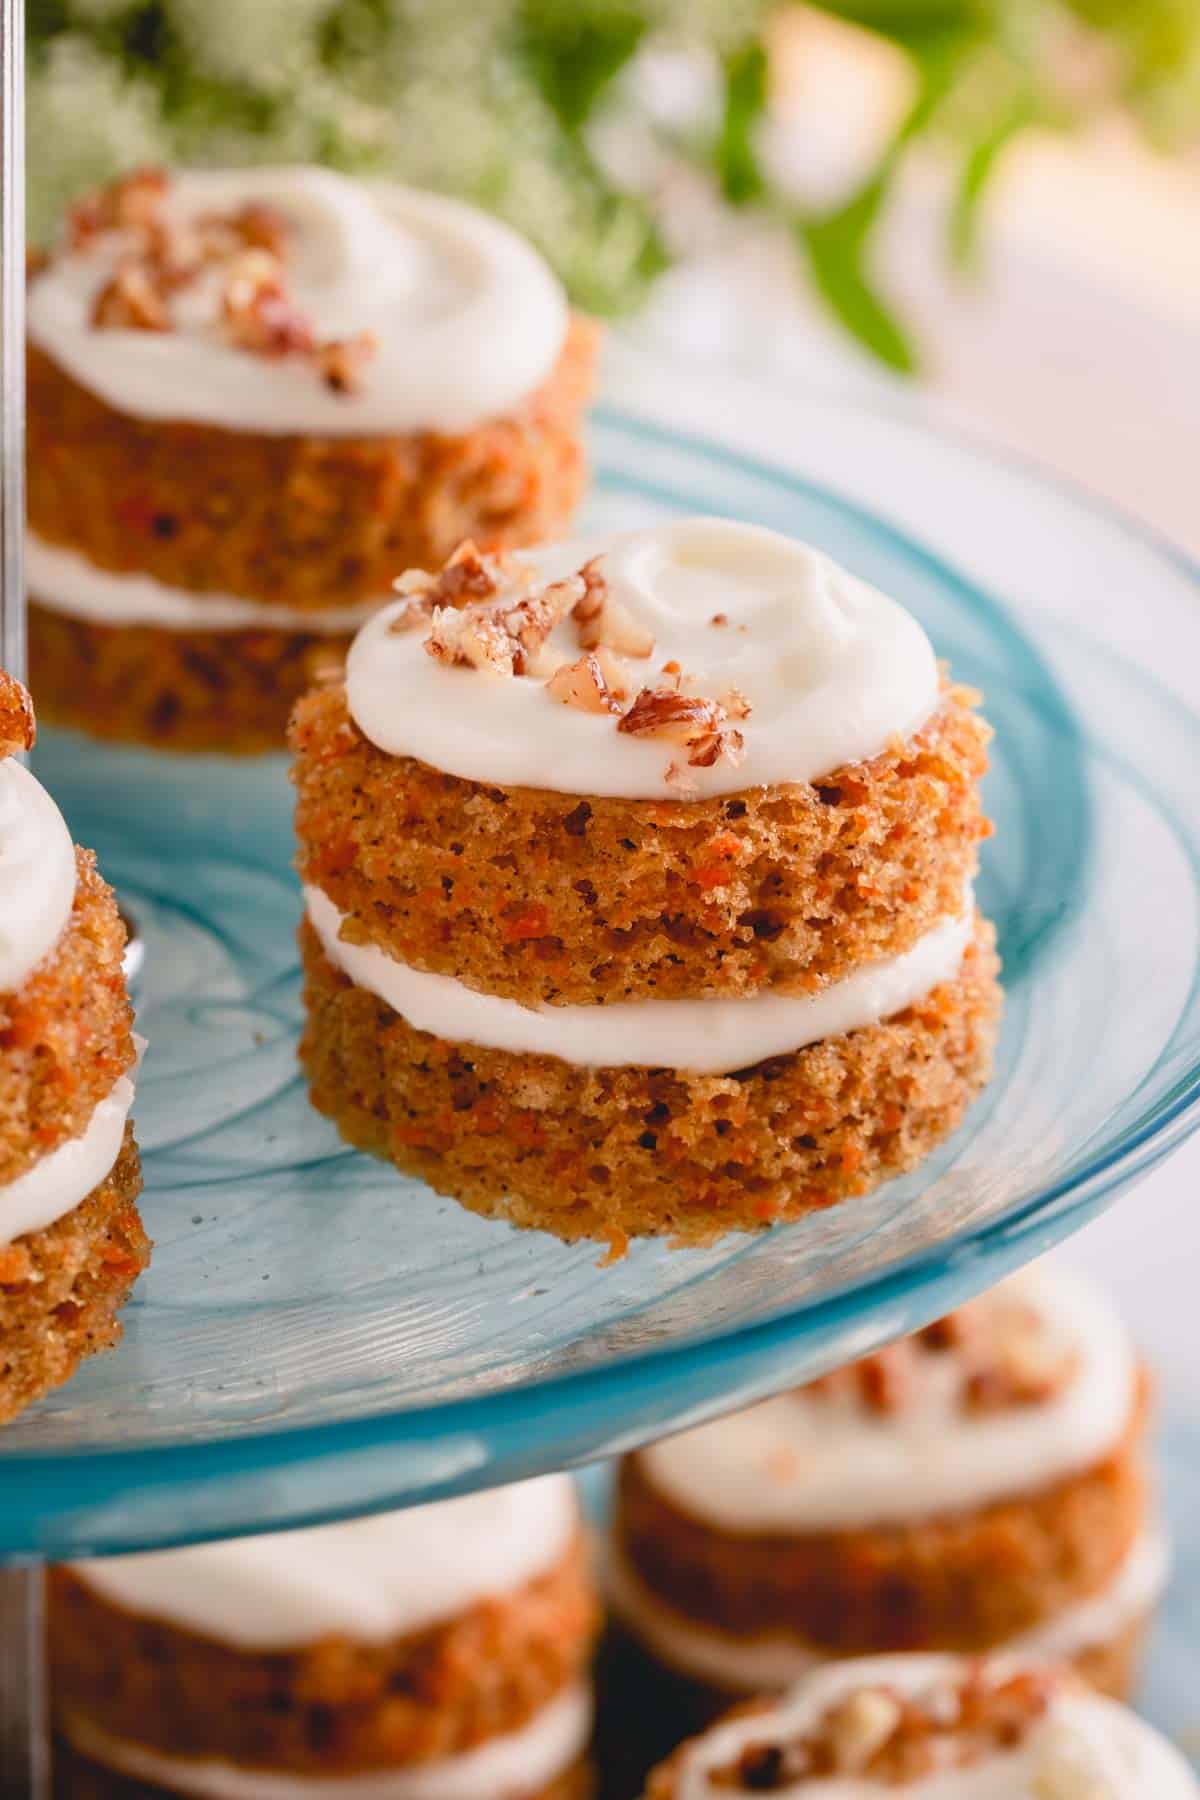 Mini Carrot Cake Recipes: Cute and Carrot-y